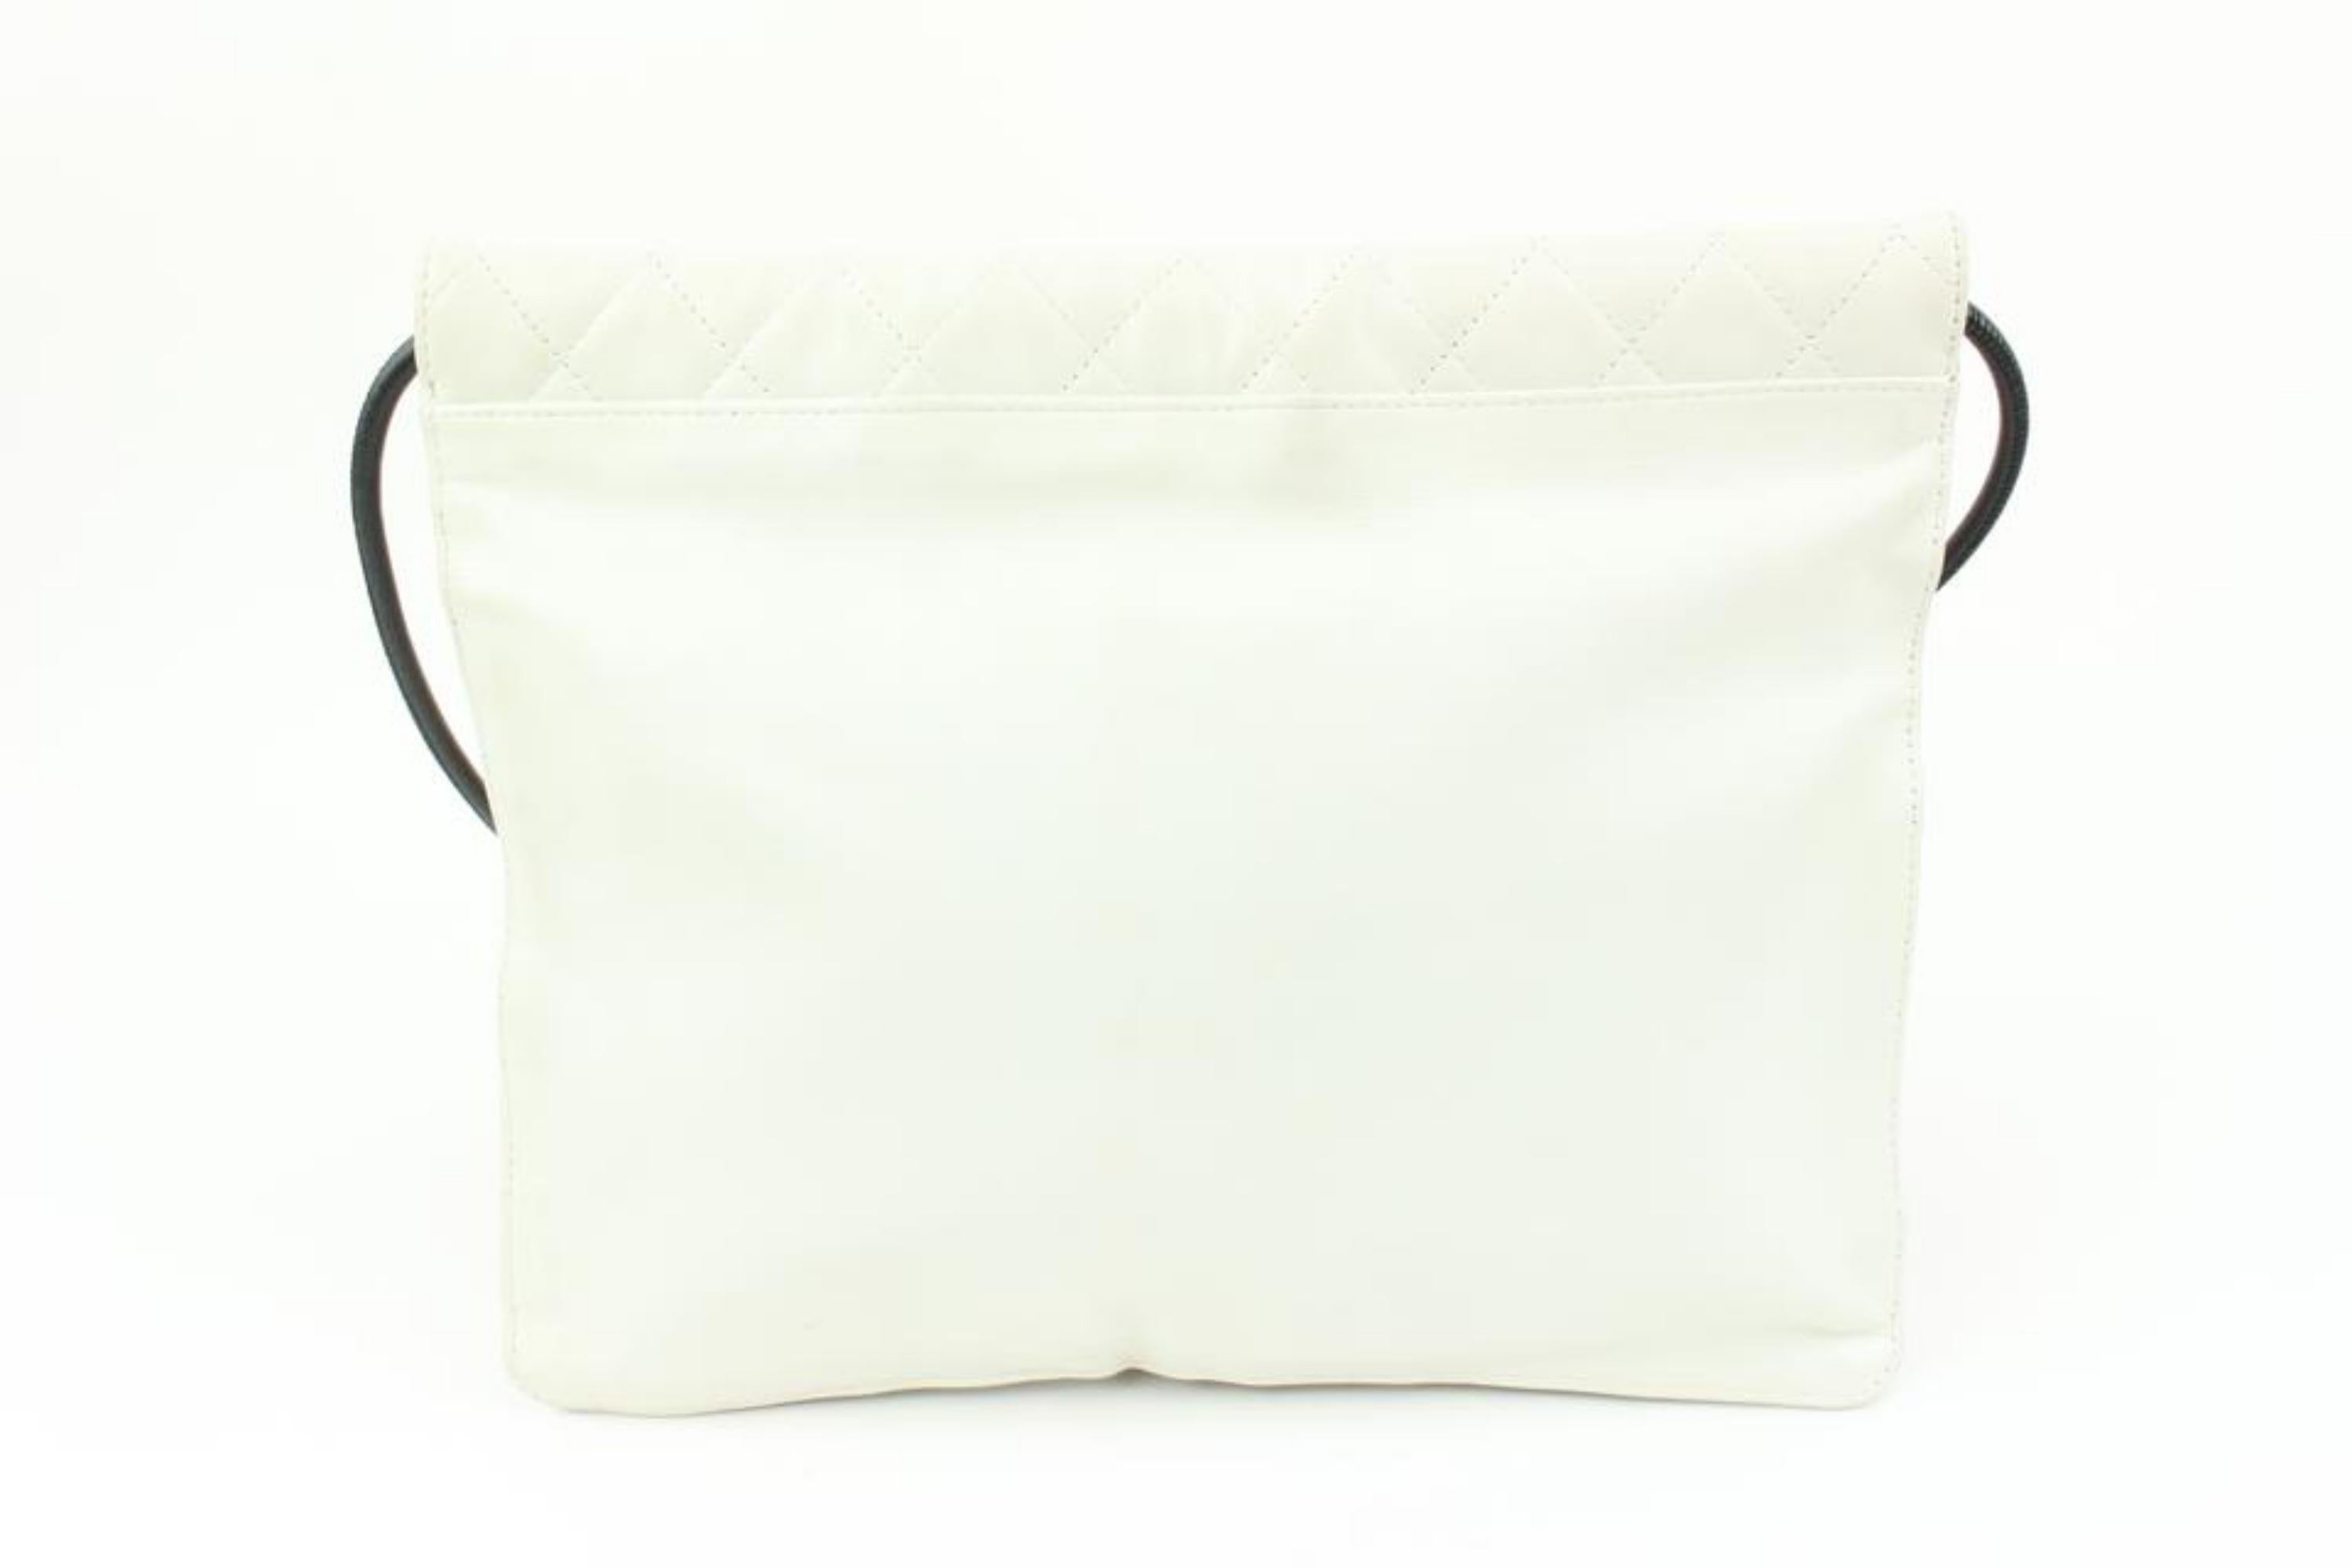 Chanel White Quilted Cambon Waist Pouch Fanny Pack 2way Crossbody 7ck310s In Good Condition For Sale In Dix hills, NY